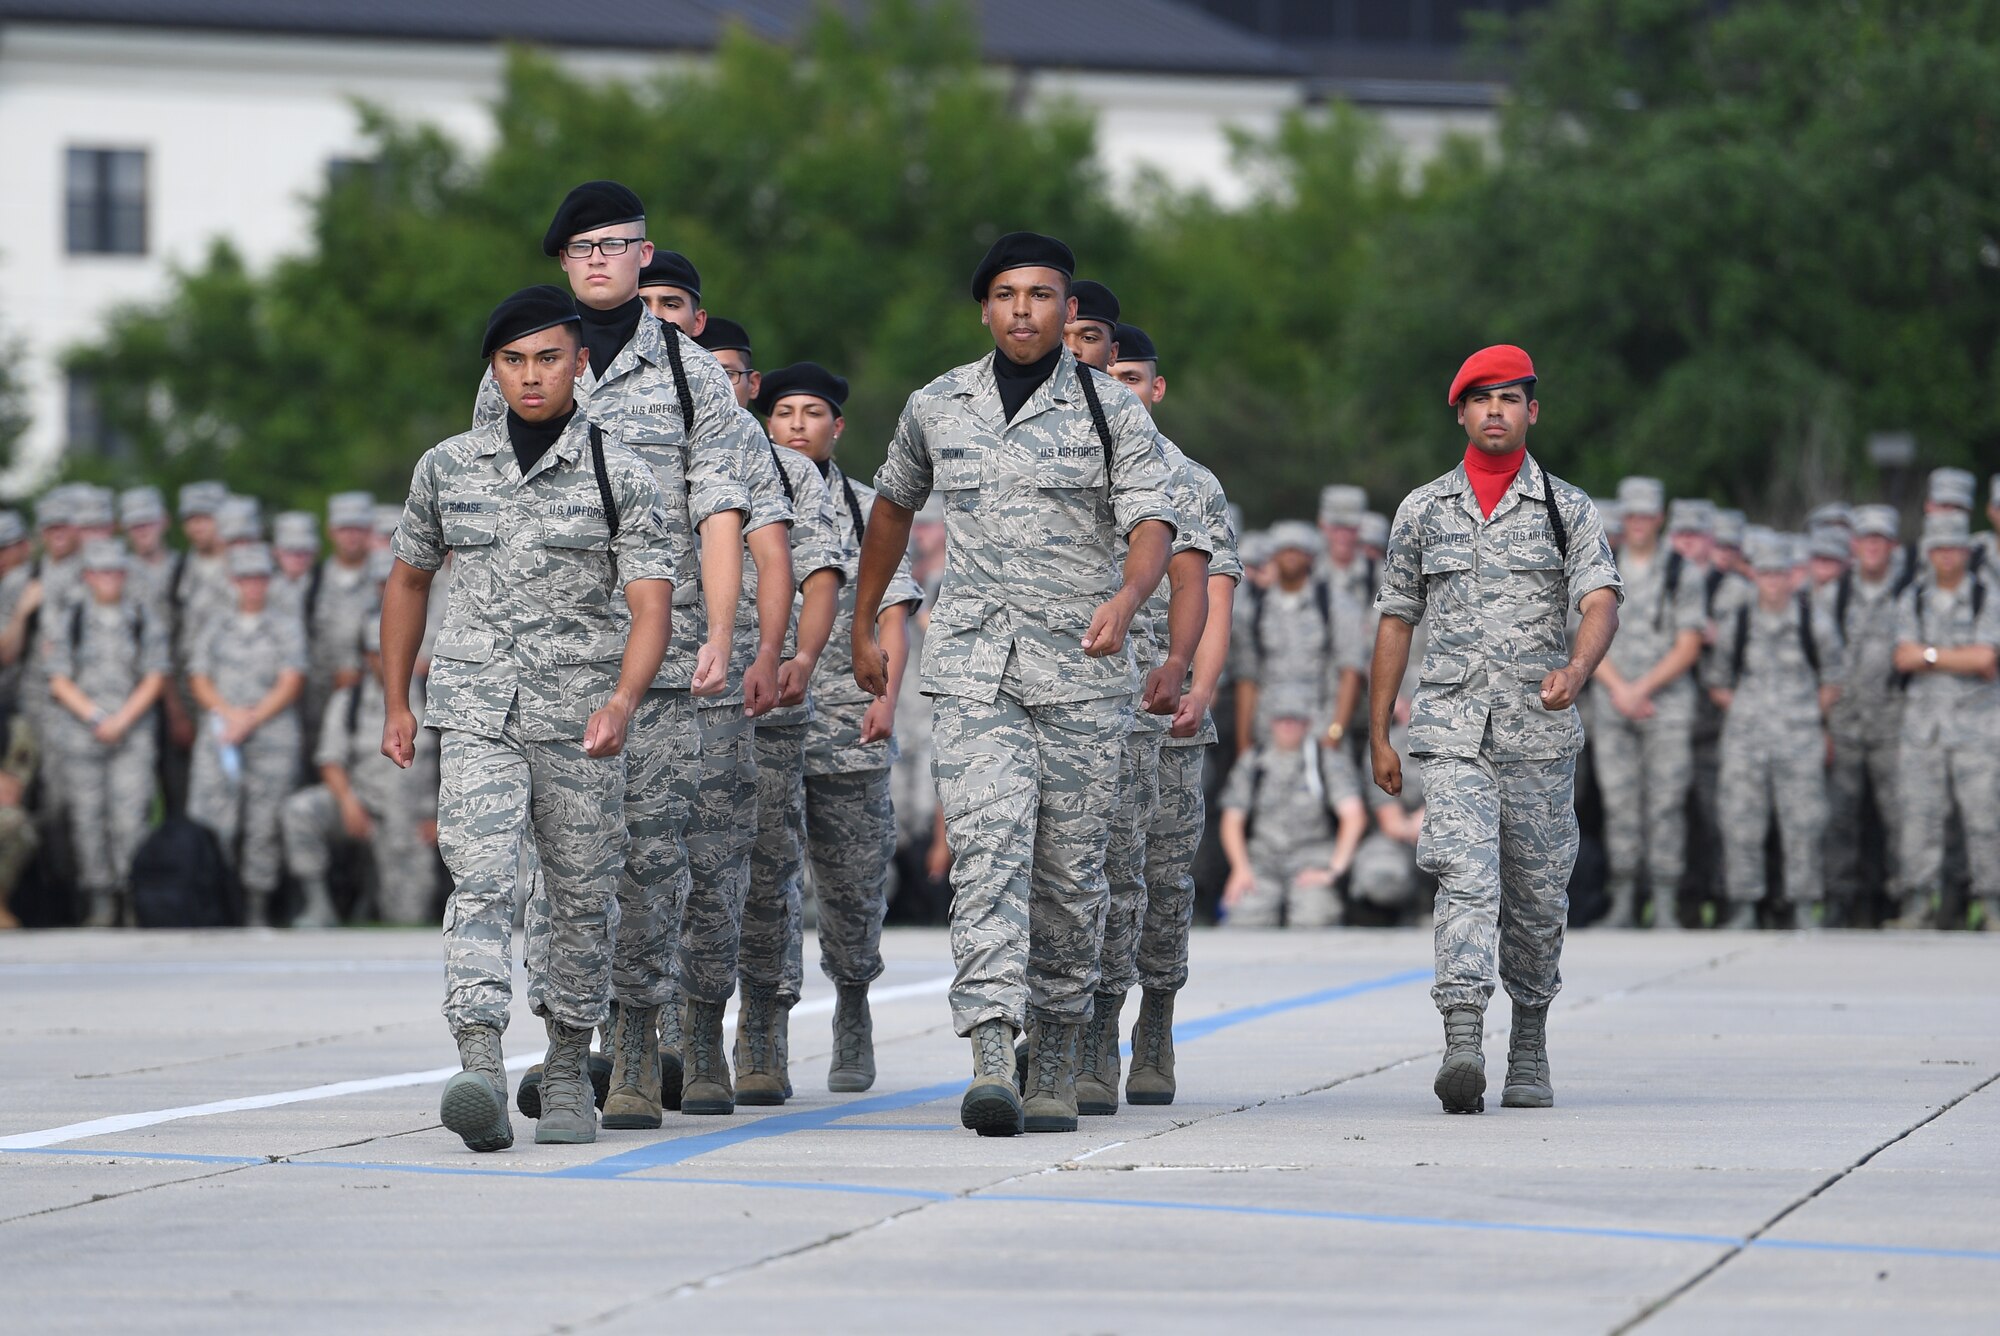 The Keesler Air Force Base regulation drill team performs their routine at the Levitow Training Support Facility drill pad on Keesler Air Force Base, Mississippi, May 21, 2019. The drill teams, made up of Airmen from various squadrons within the 81st Training Group, debuted their performances in front of base leadership and their peers. Every year both the regulation and freestyle teams compete at Lackland Air Force Base, Texas, for "Best Technical Training Drill Team of the Year." However, this year it was cancelled due to inclement weather. (U.S. Air Force photo by Kemberly Groue)